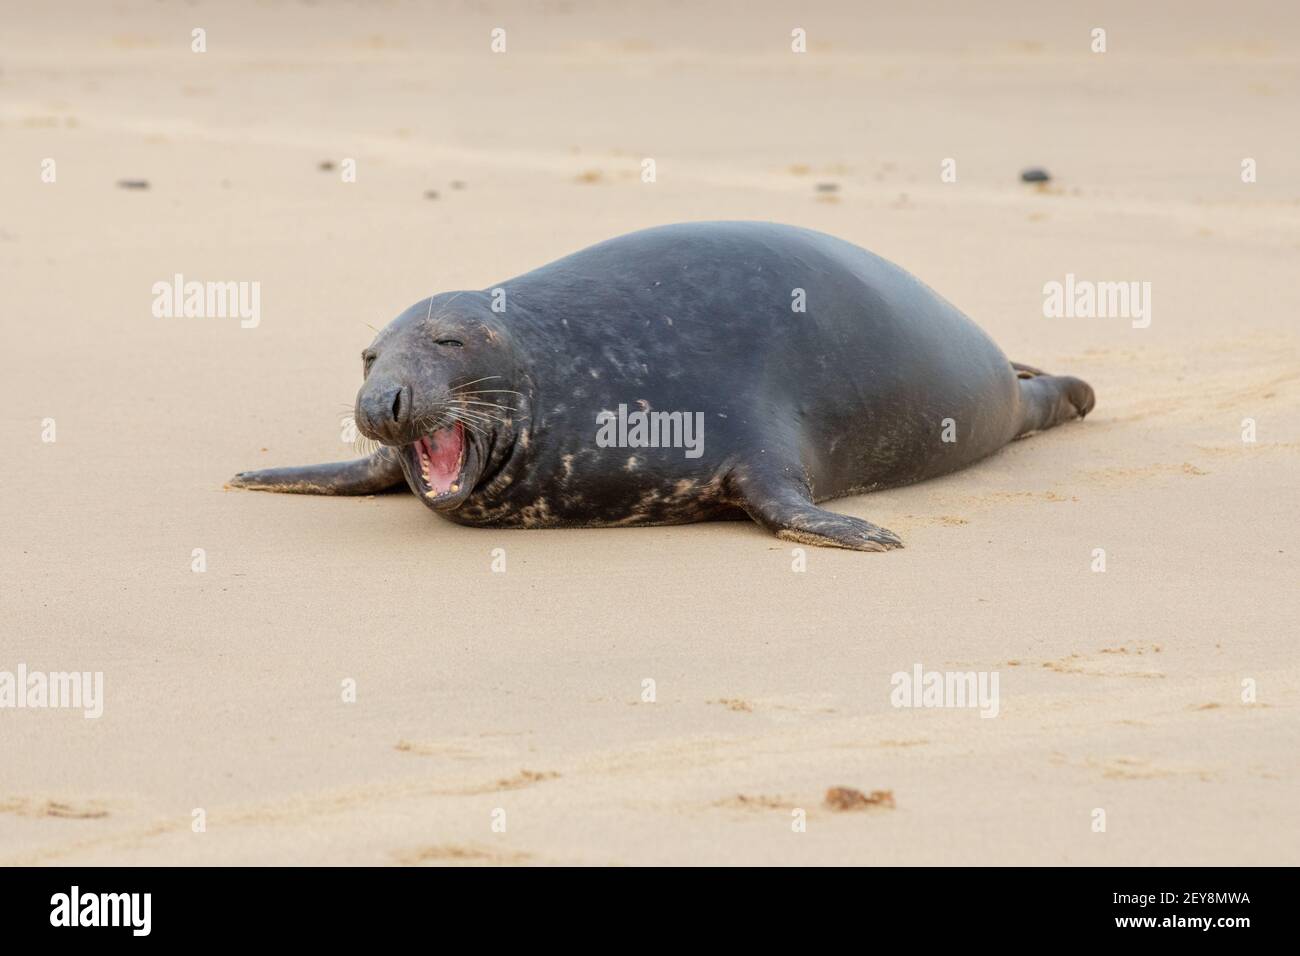 Grey Seal (Halichoerus grypus). Resting, lying, head raised, on the beach sand surface. Having big yawn, revealing dentition, adapted for fish catching Stock Photo